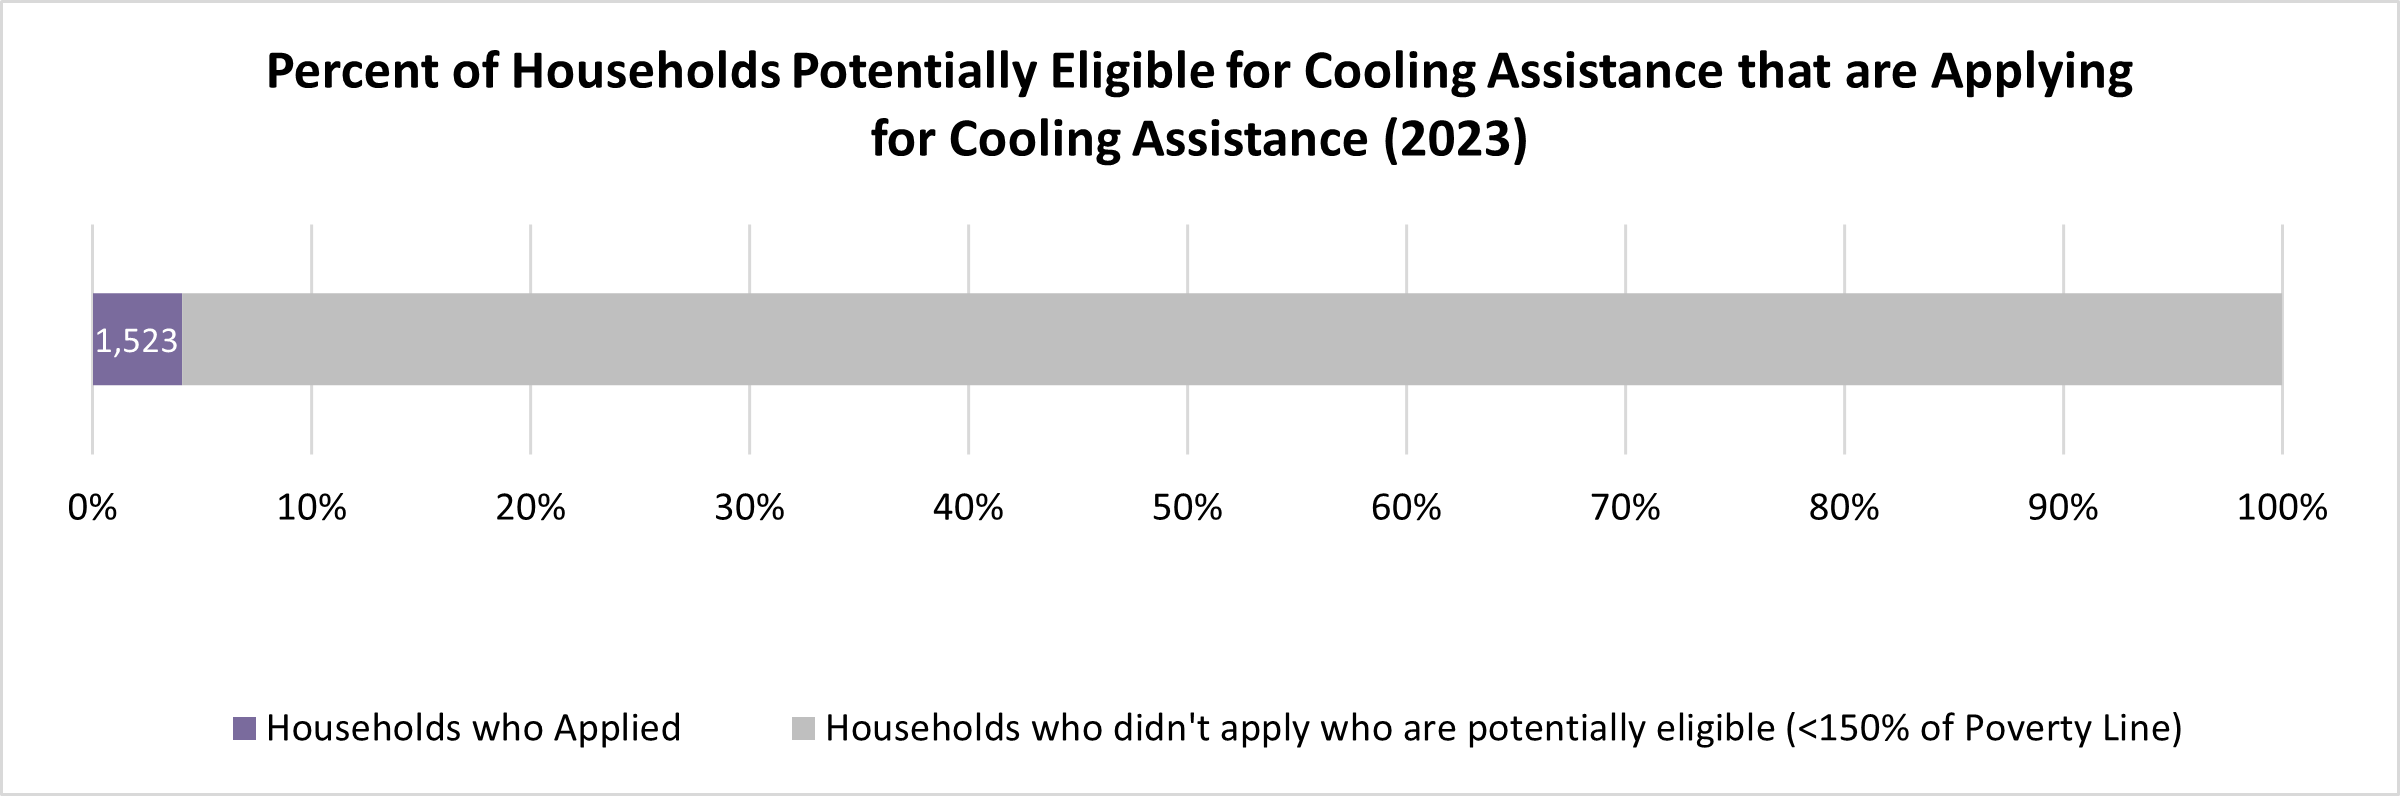 percent of households potentially eligible for cooling assistance that are applying for cooling assistance in 2023